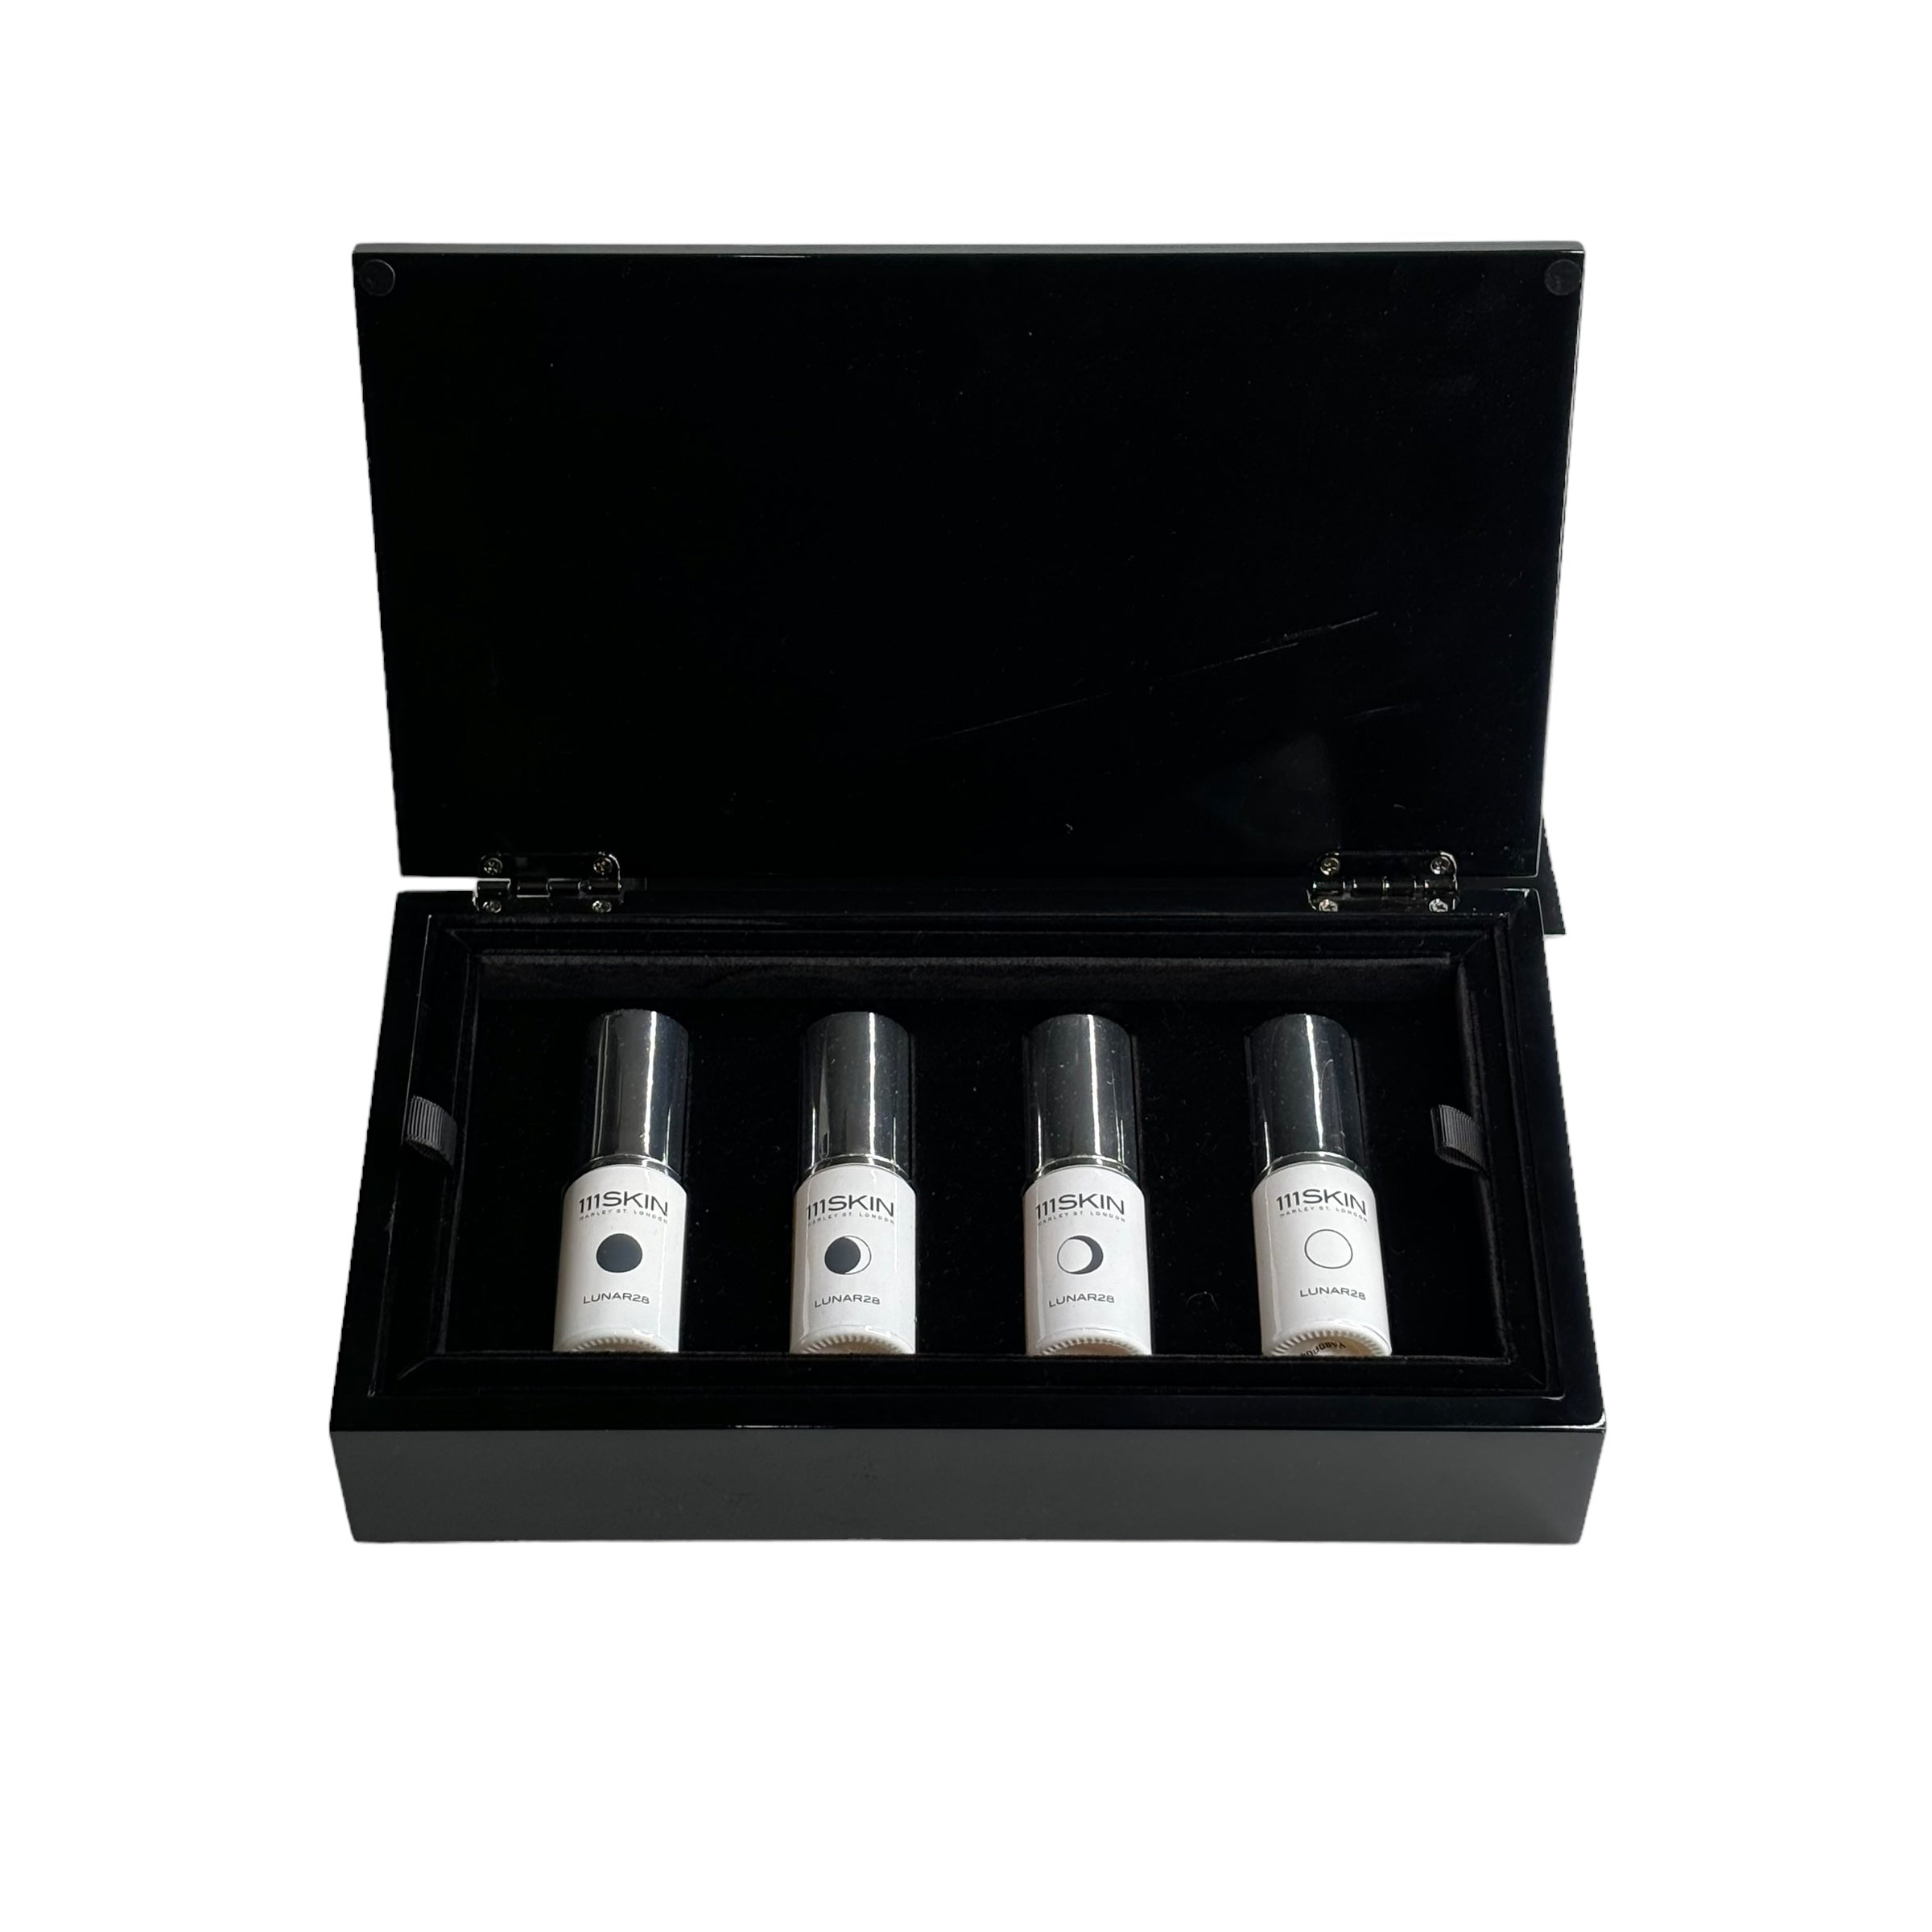 111SKIN Lunar 28 Day Brightening and Anti-Ageing System